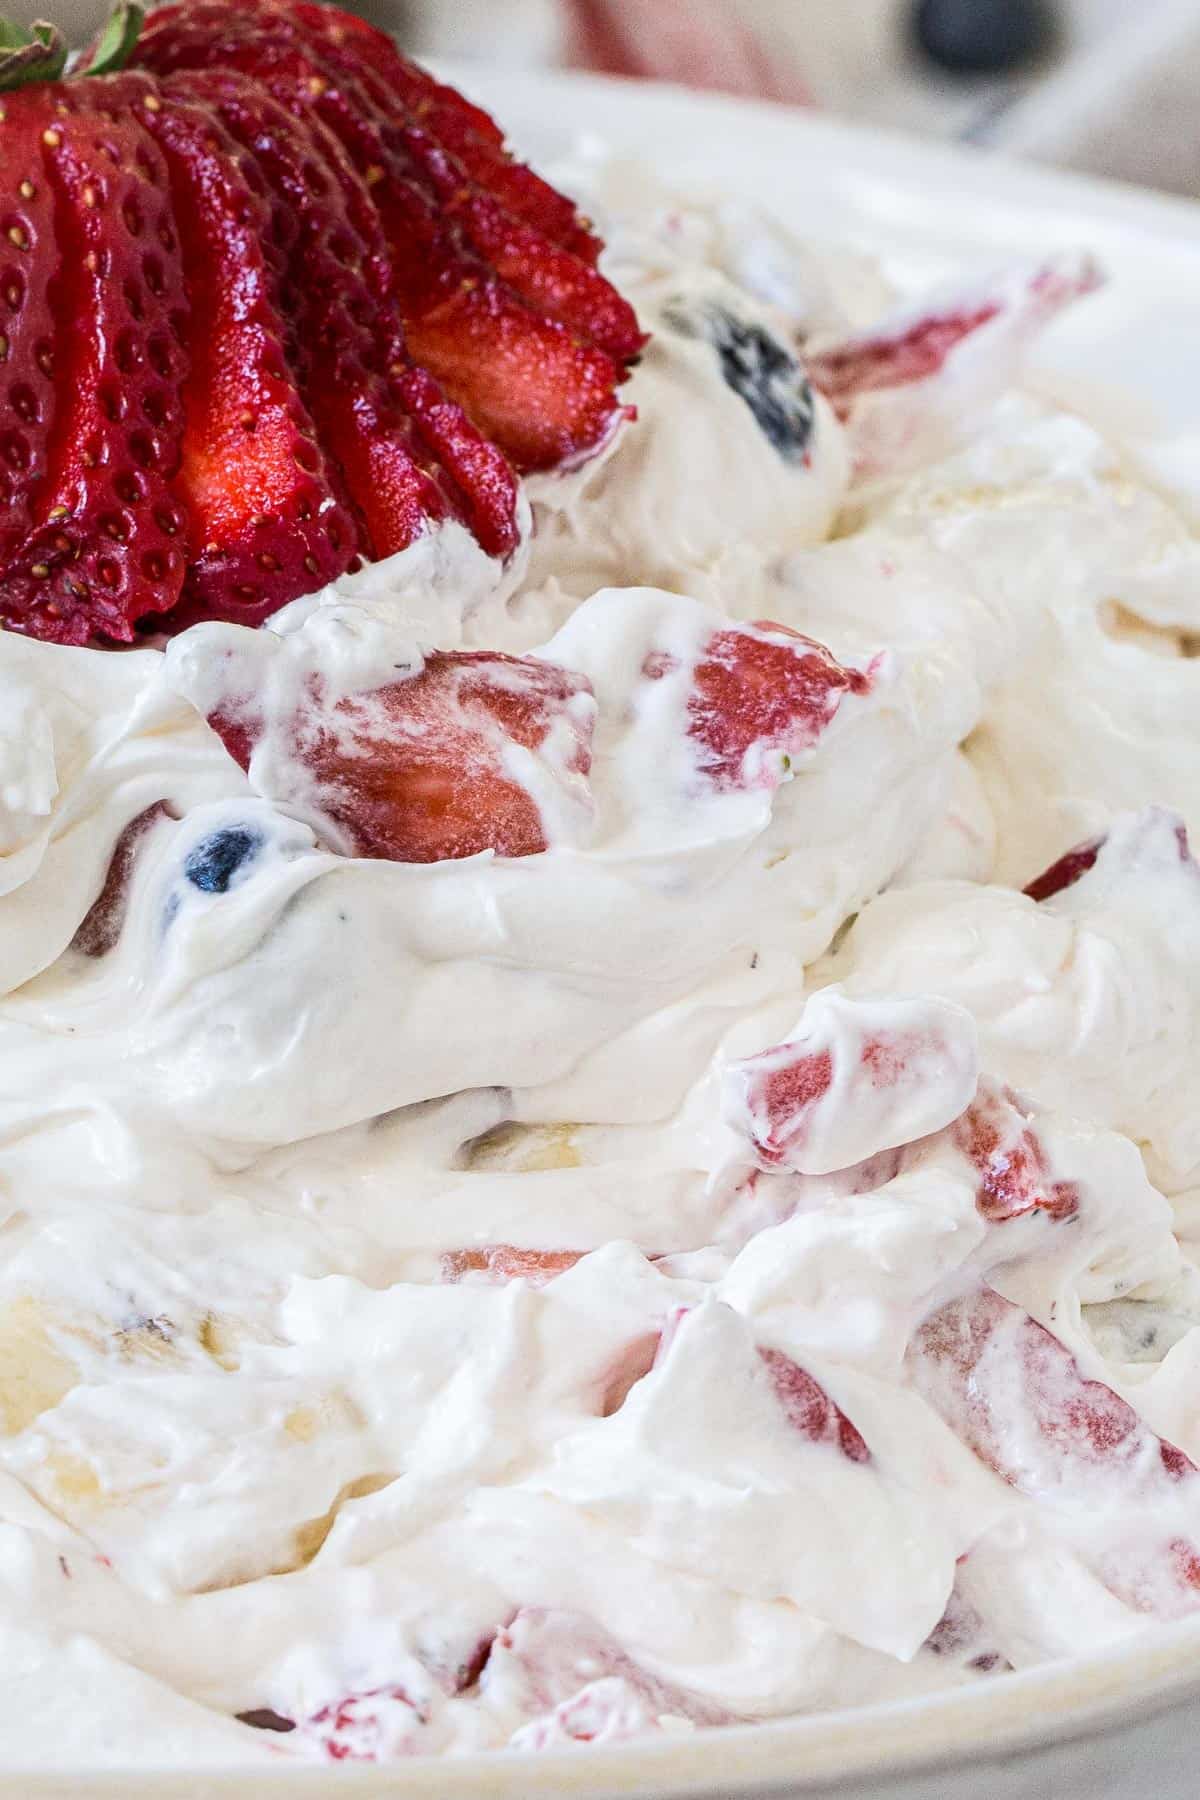 Sliced strawberry on top of red white and blue cheesecake salad.